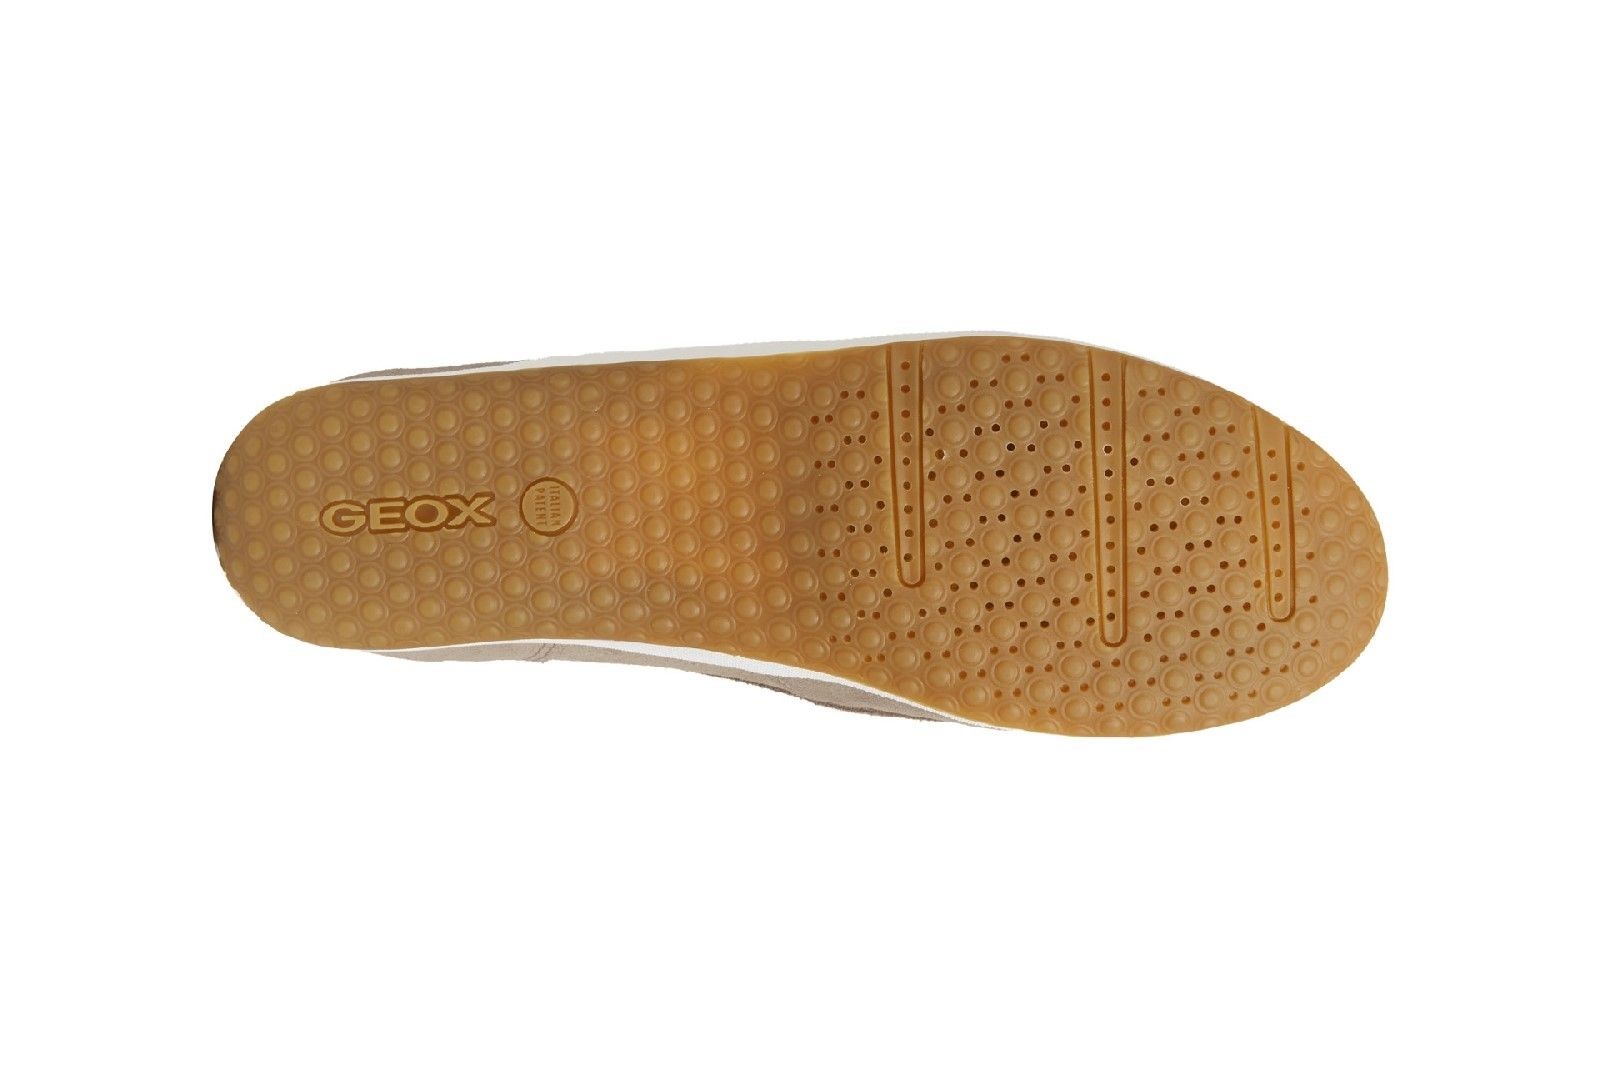 Exclusive patent. The combination of the perforated sole and resistant breathable and waterproof membrane allow for natural temperature regulation, creating the perfect microclimate inside the shoe.It keeps feet dry and comfortable for the whole day.Exclusive Patent. 
Perforated Sole. 
Breathable and waterproof membrane.